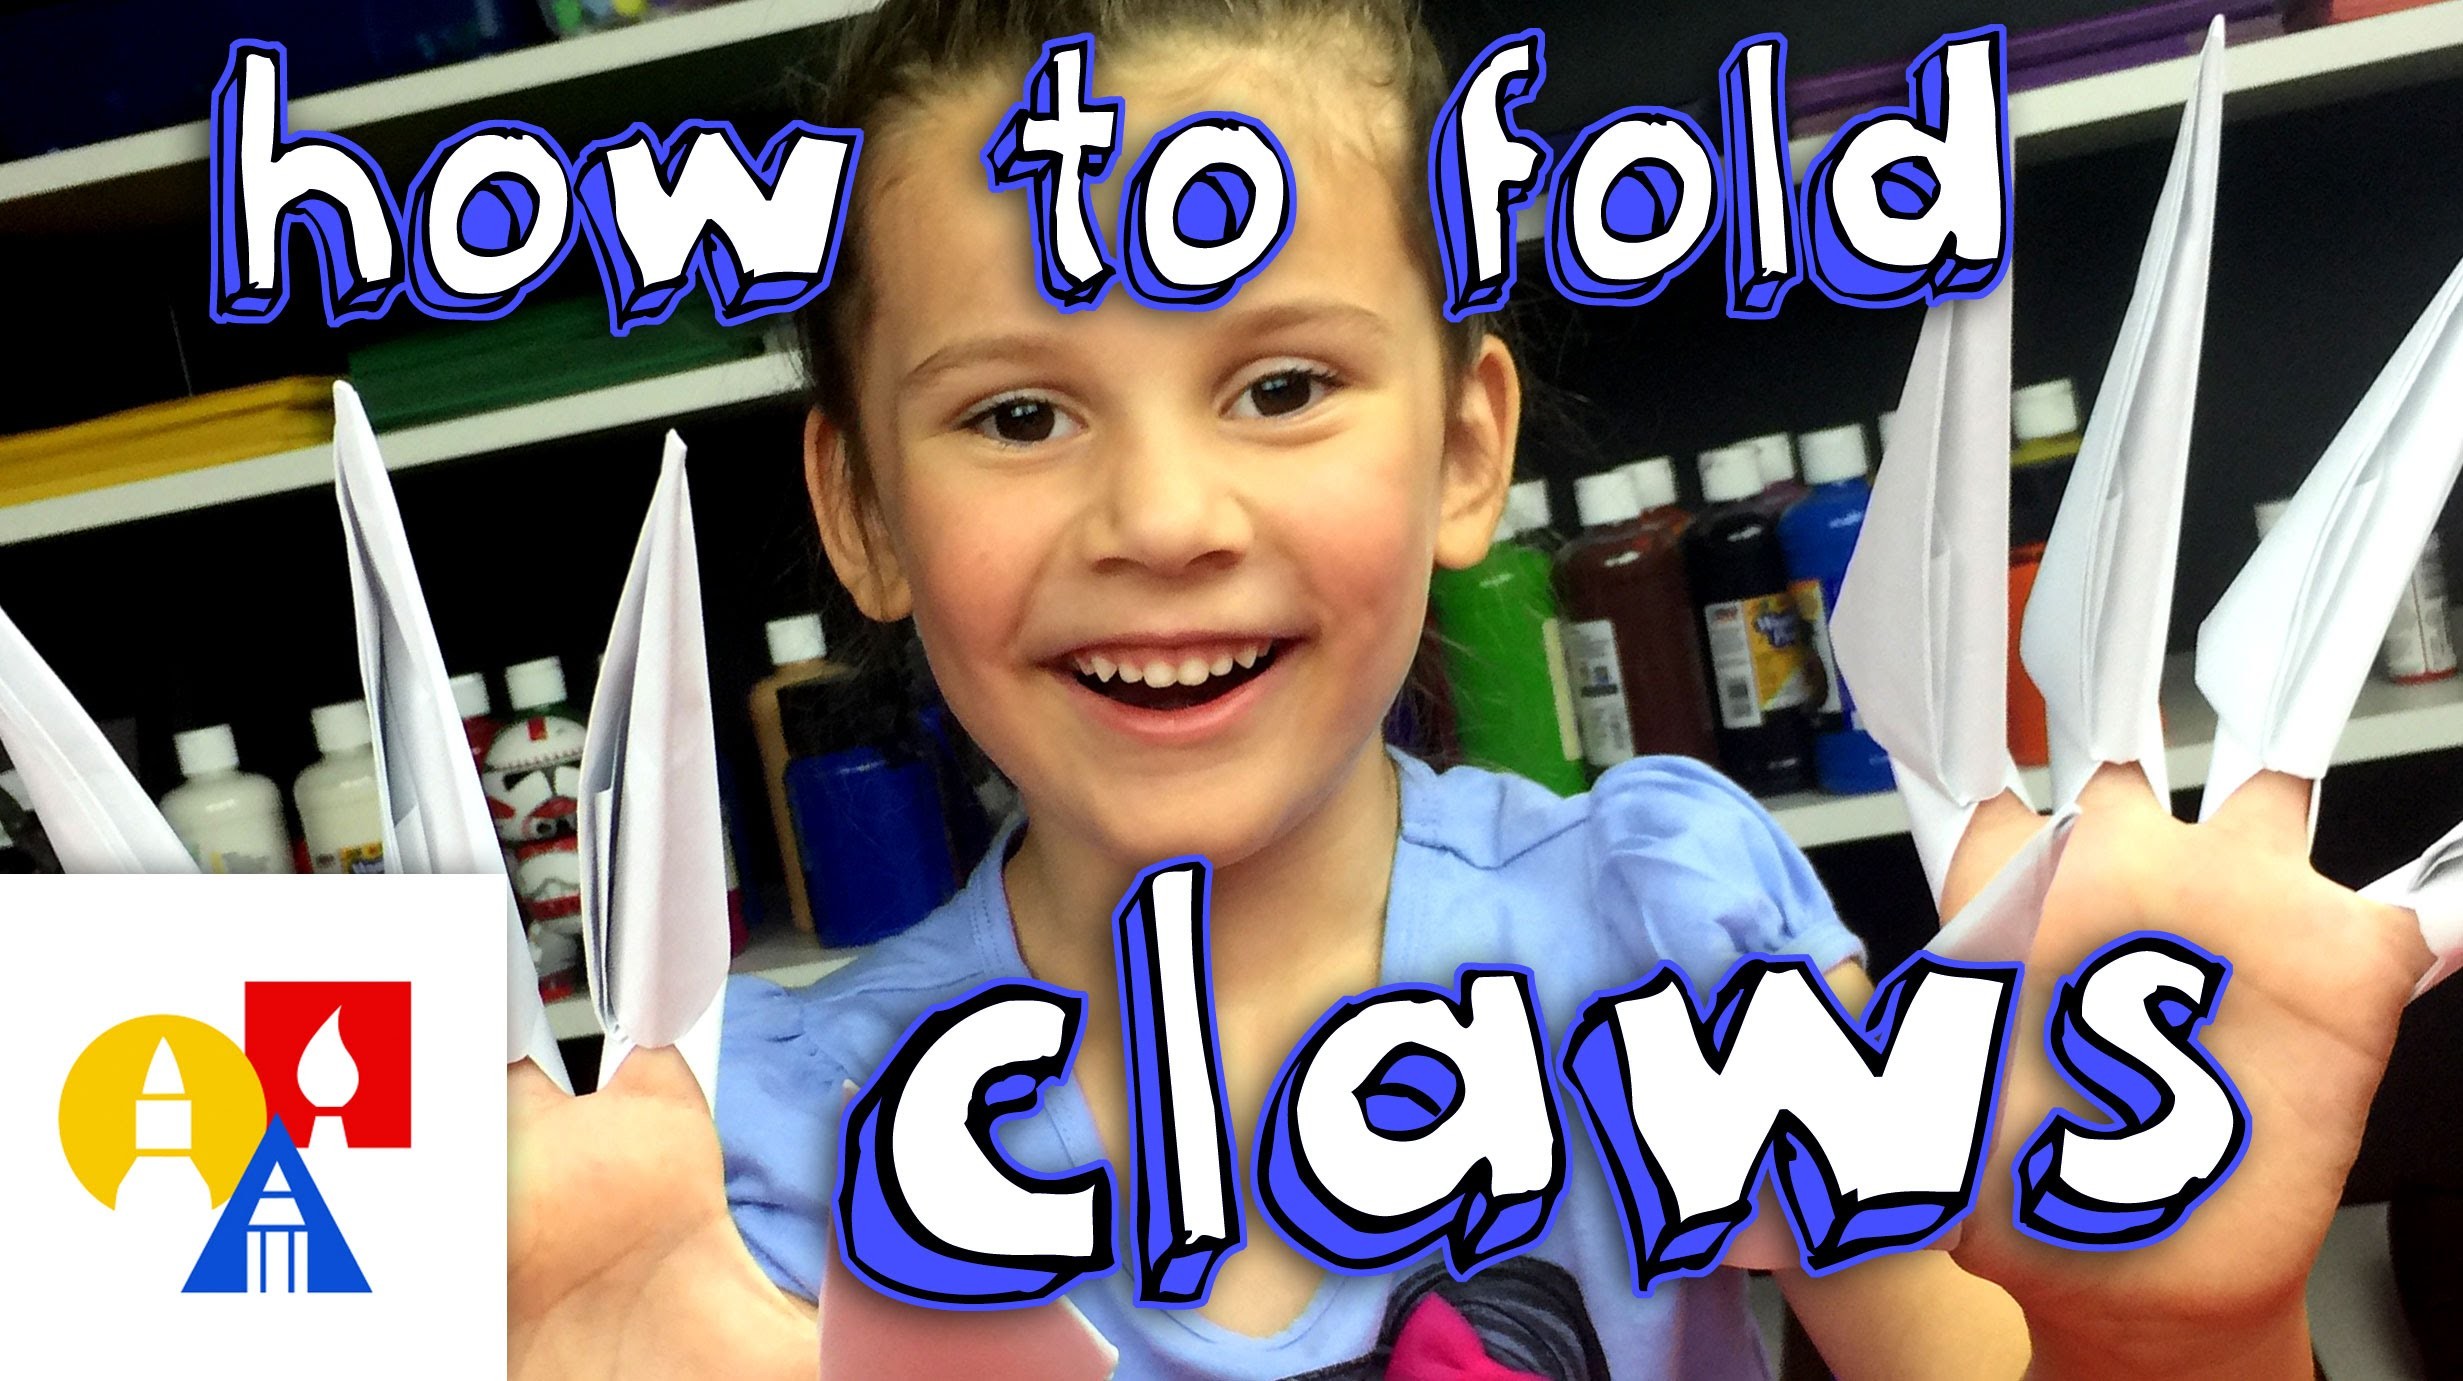 How To Fold Paper Claws